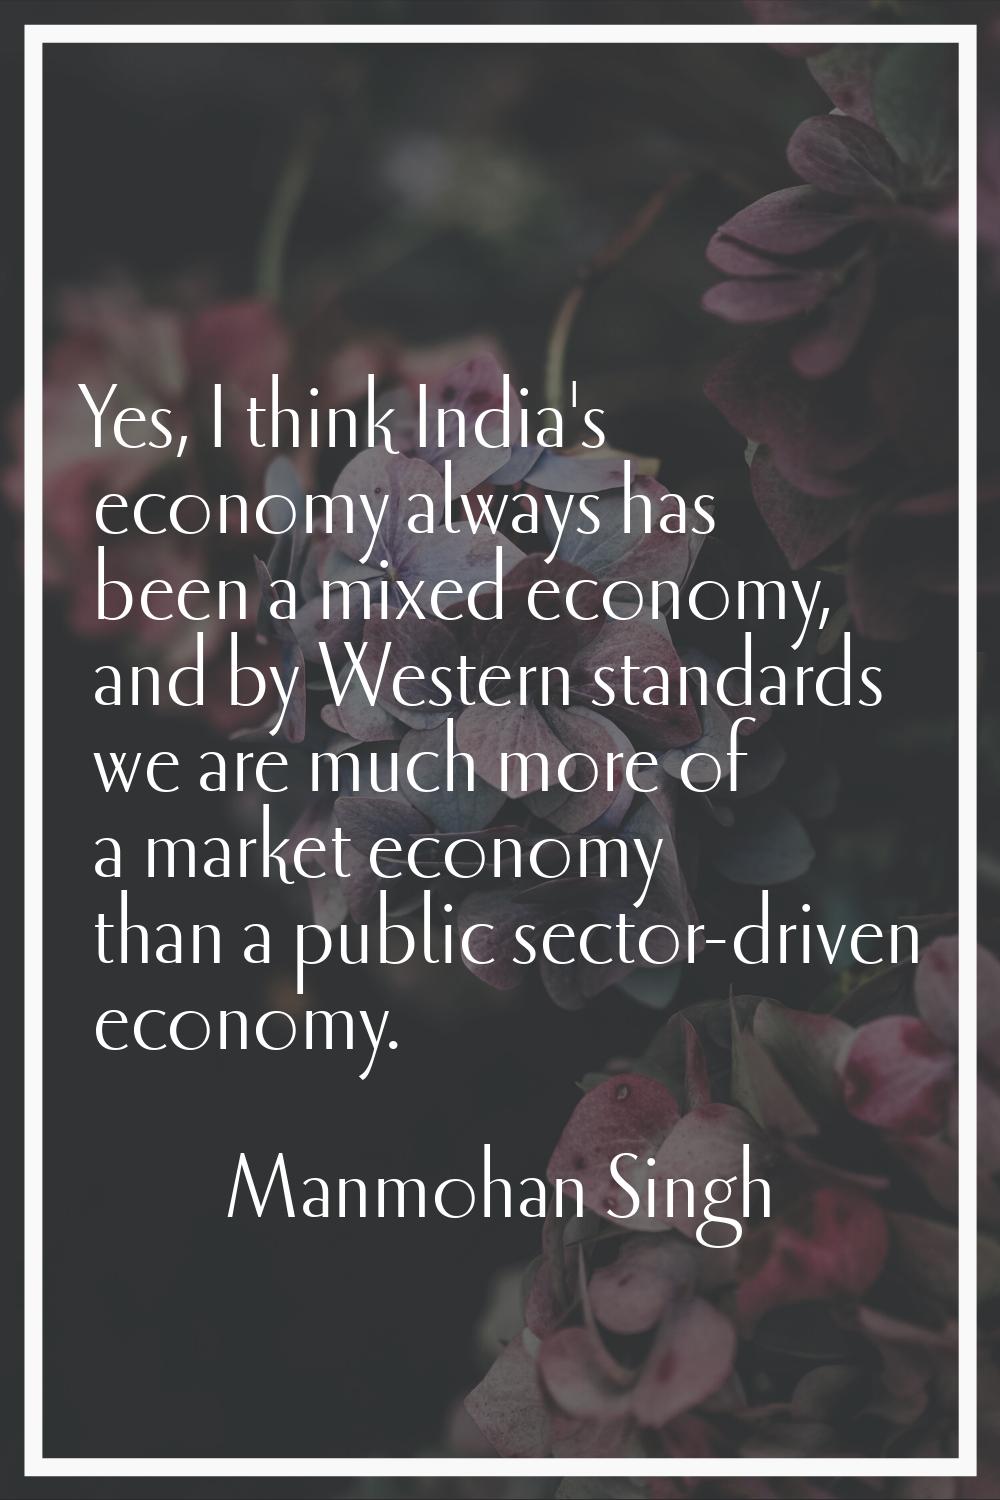 Yes, I think India's economy always has been a mixed economy, and by Western standards we are much 